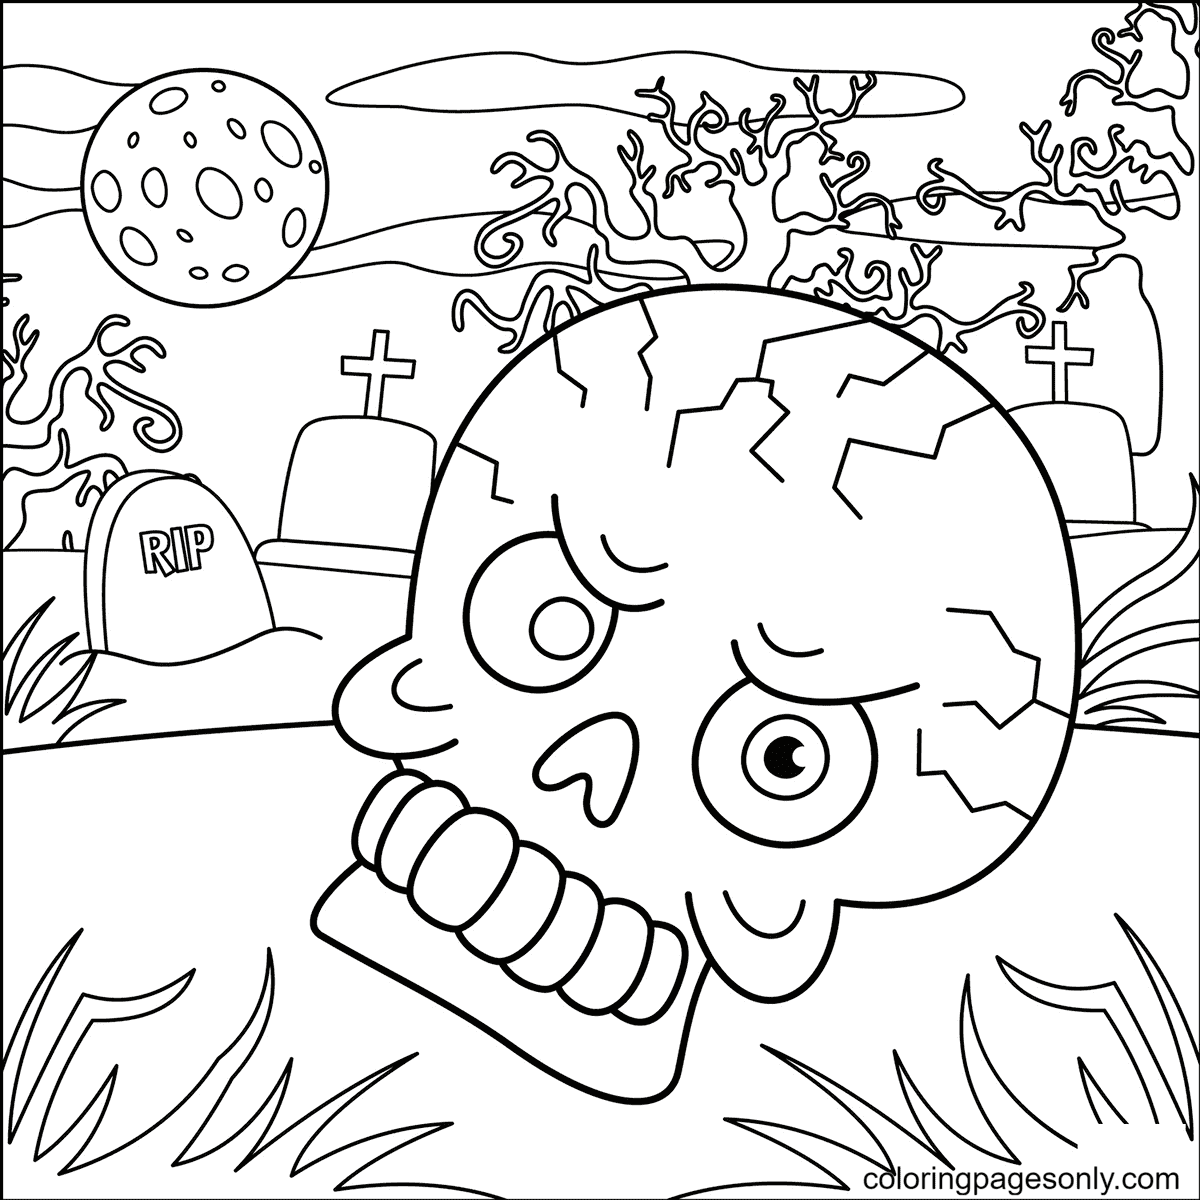 Evil Skull Coloring Pages